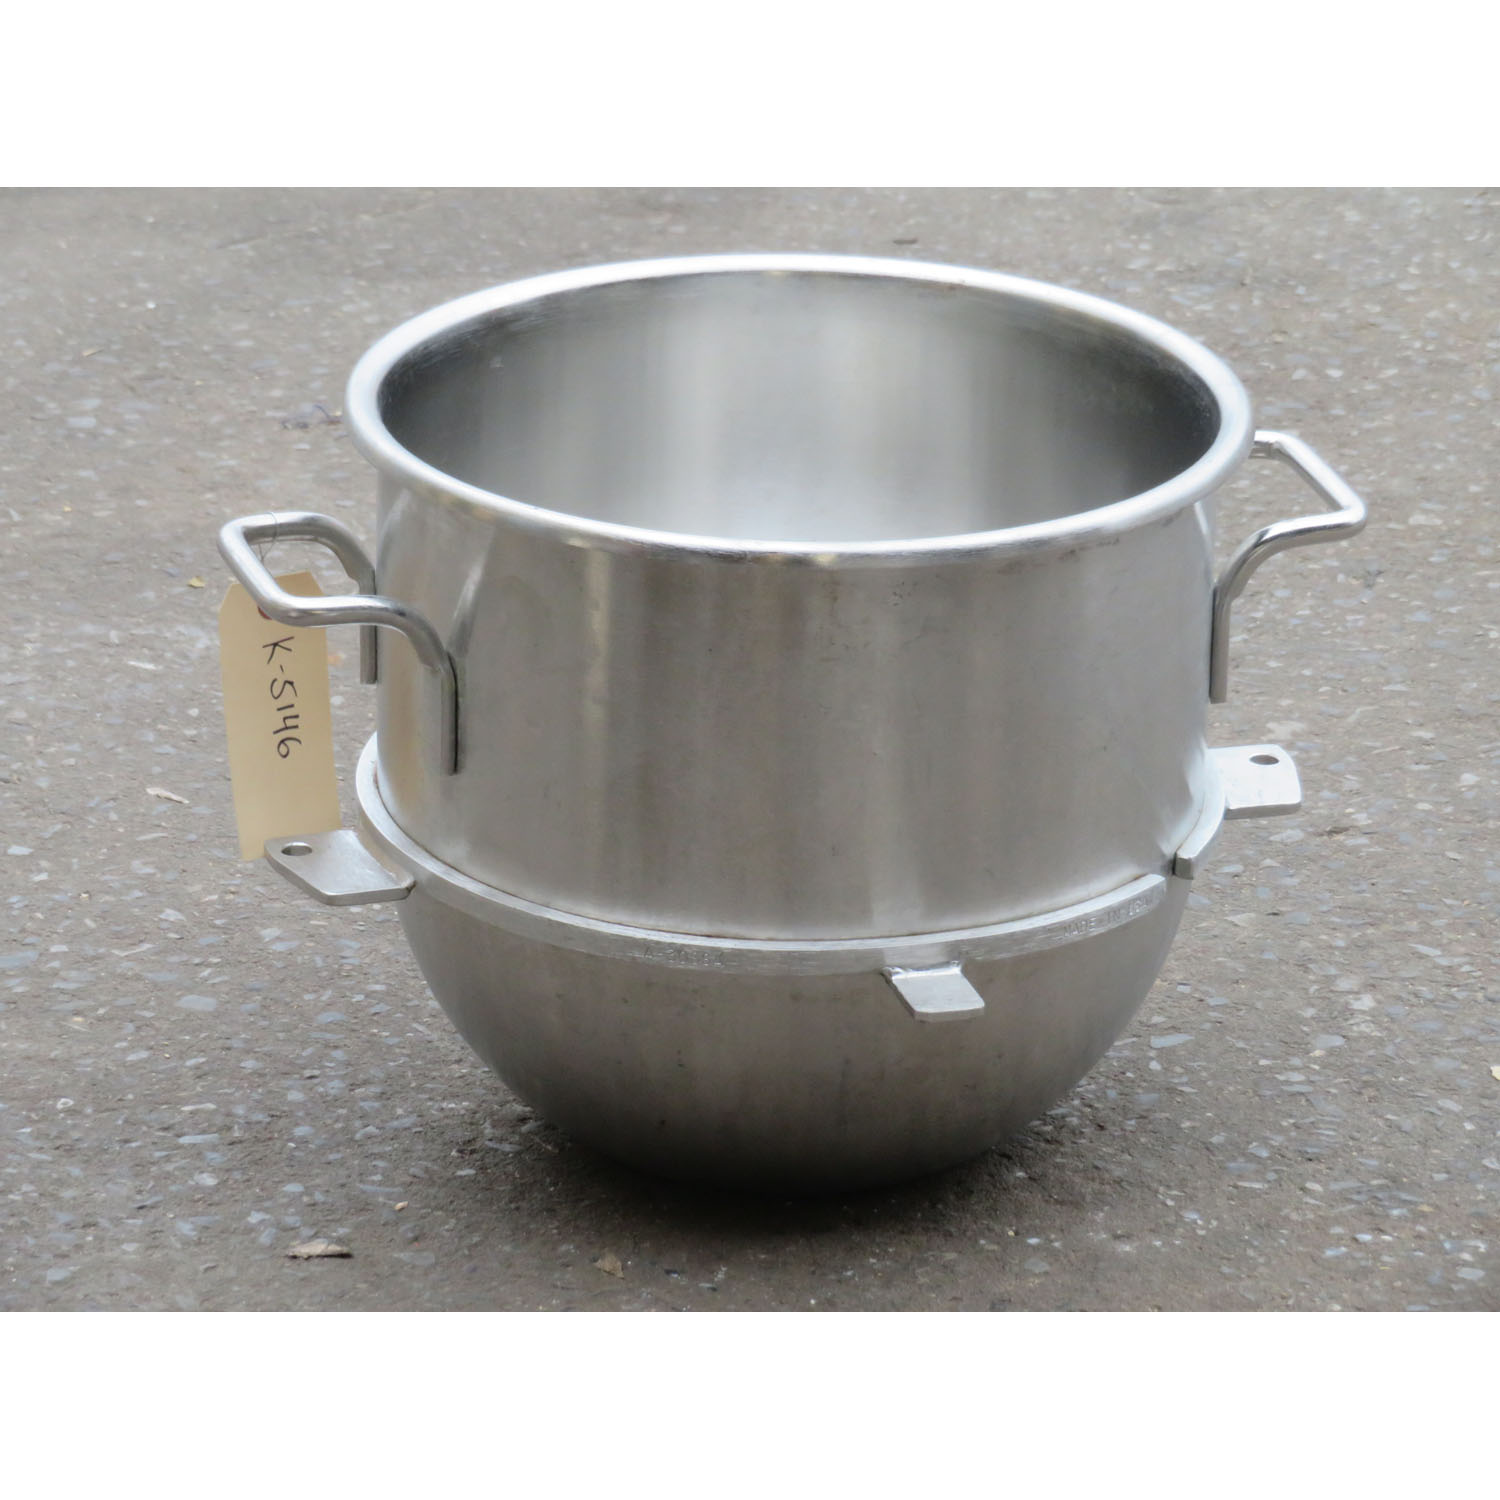 Hobart 00-295648 VMLH30 30-Quart Bowl for 80 to 40/30 Bowl Adapter , Used Excellent Condition image 1